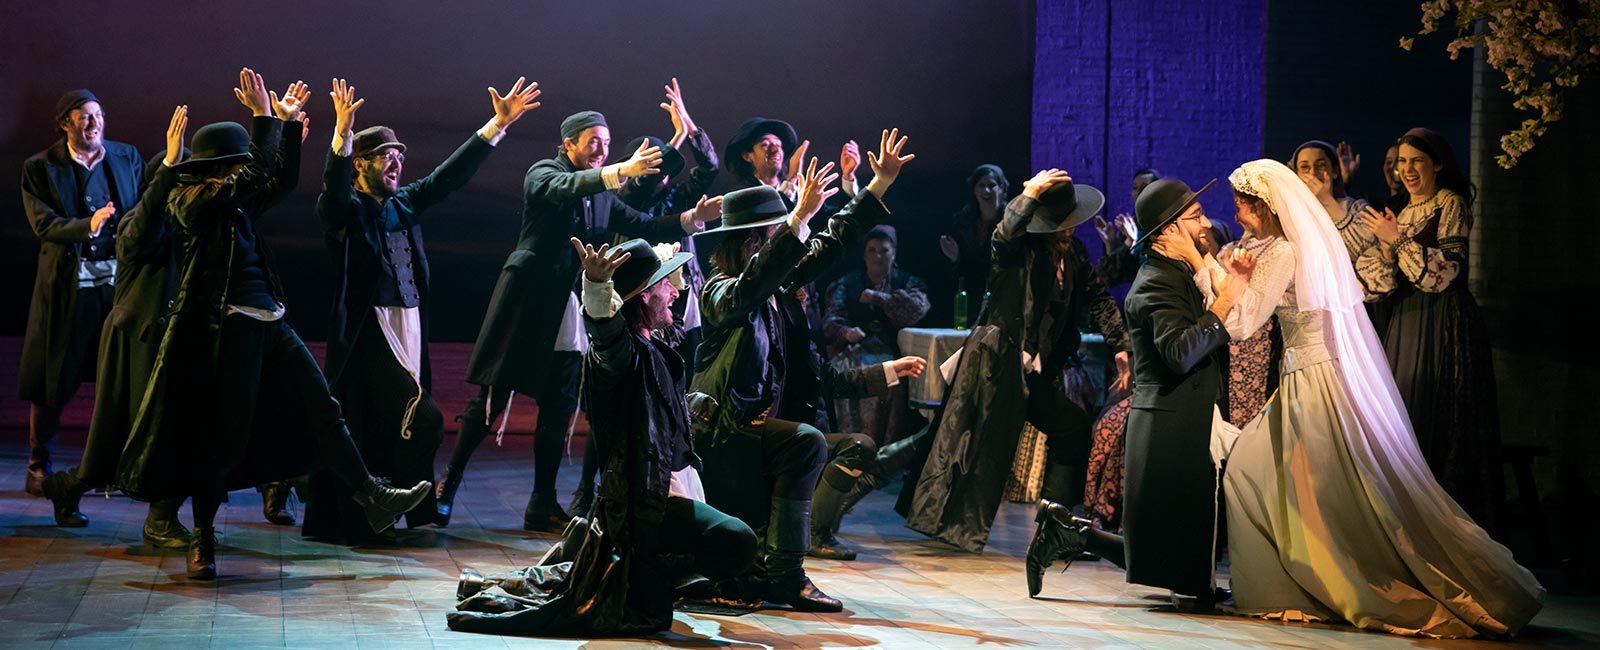 Fiddler on the Roof Tour